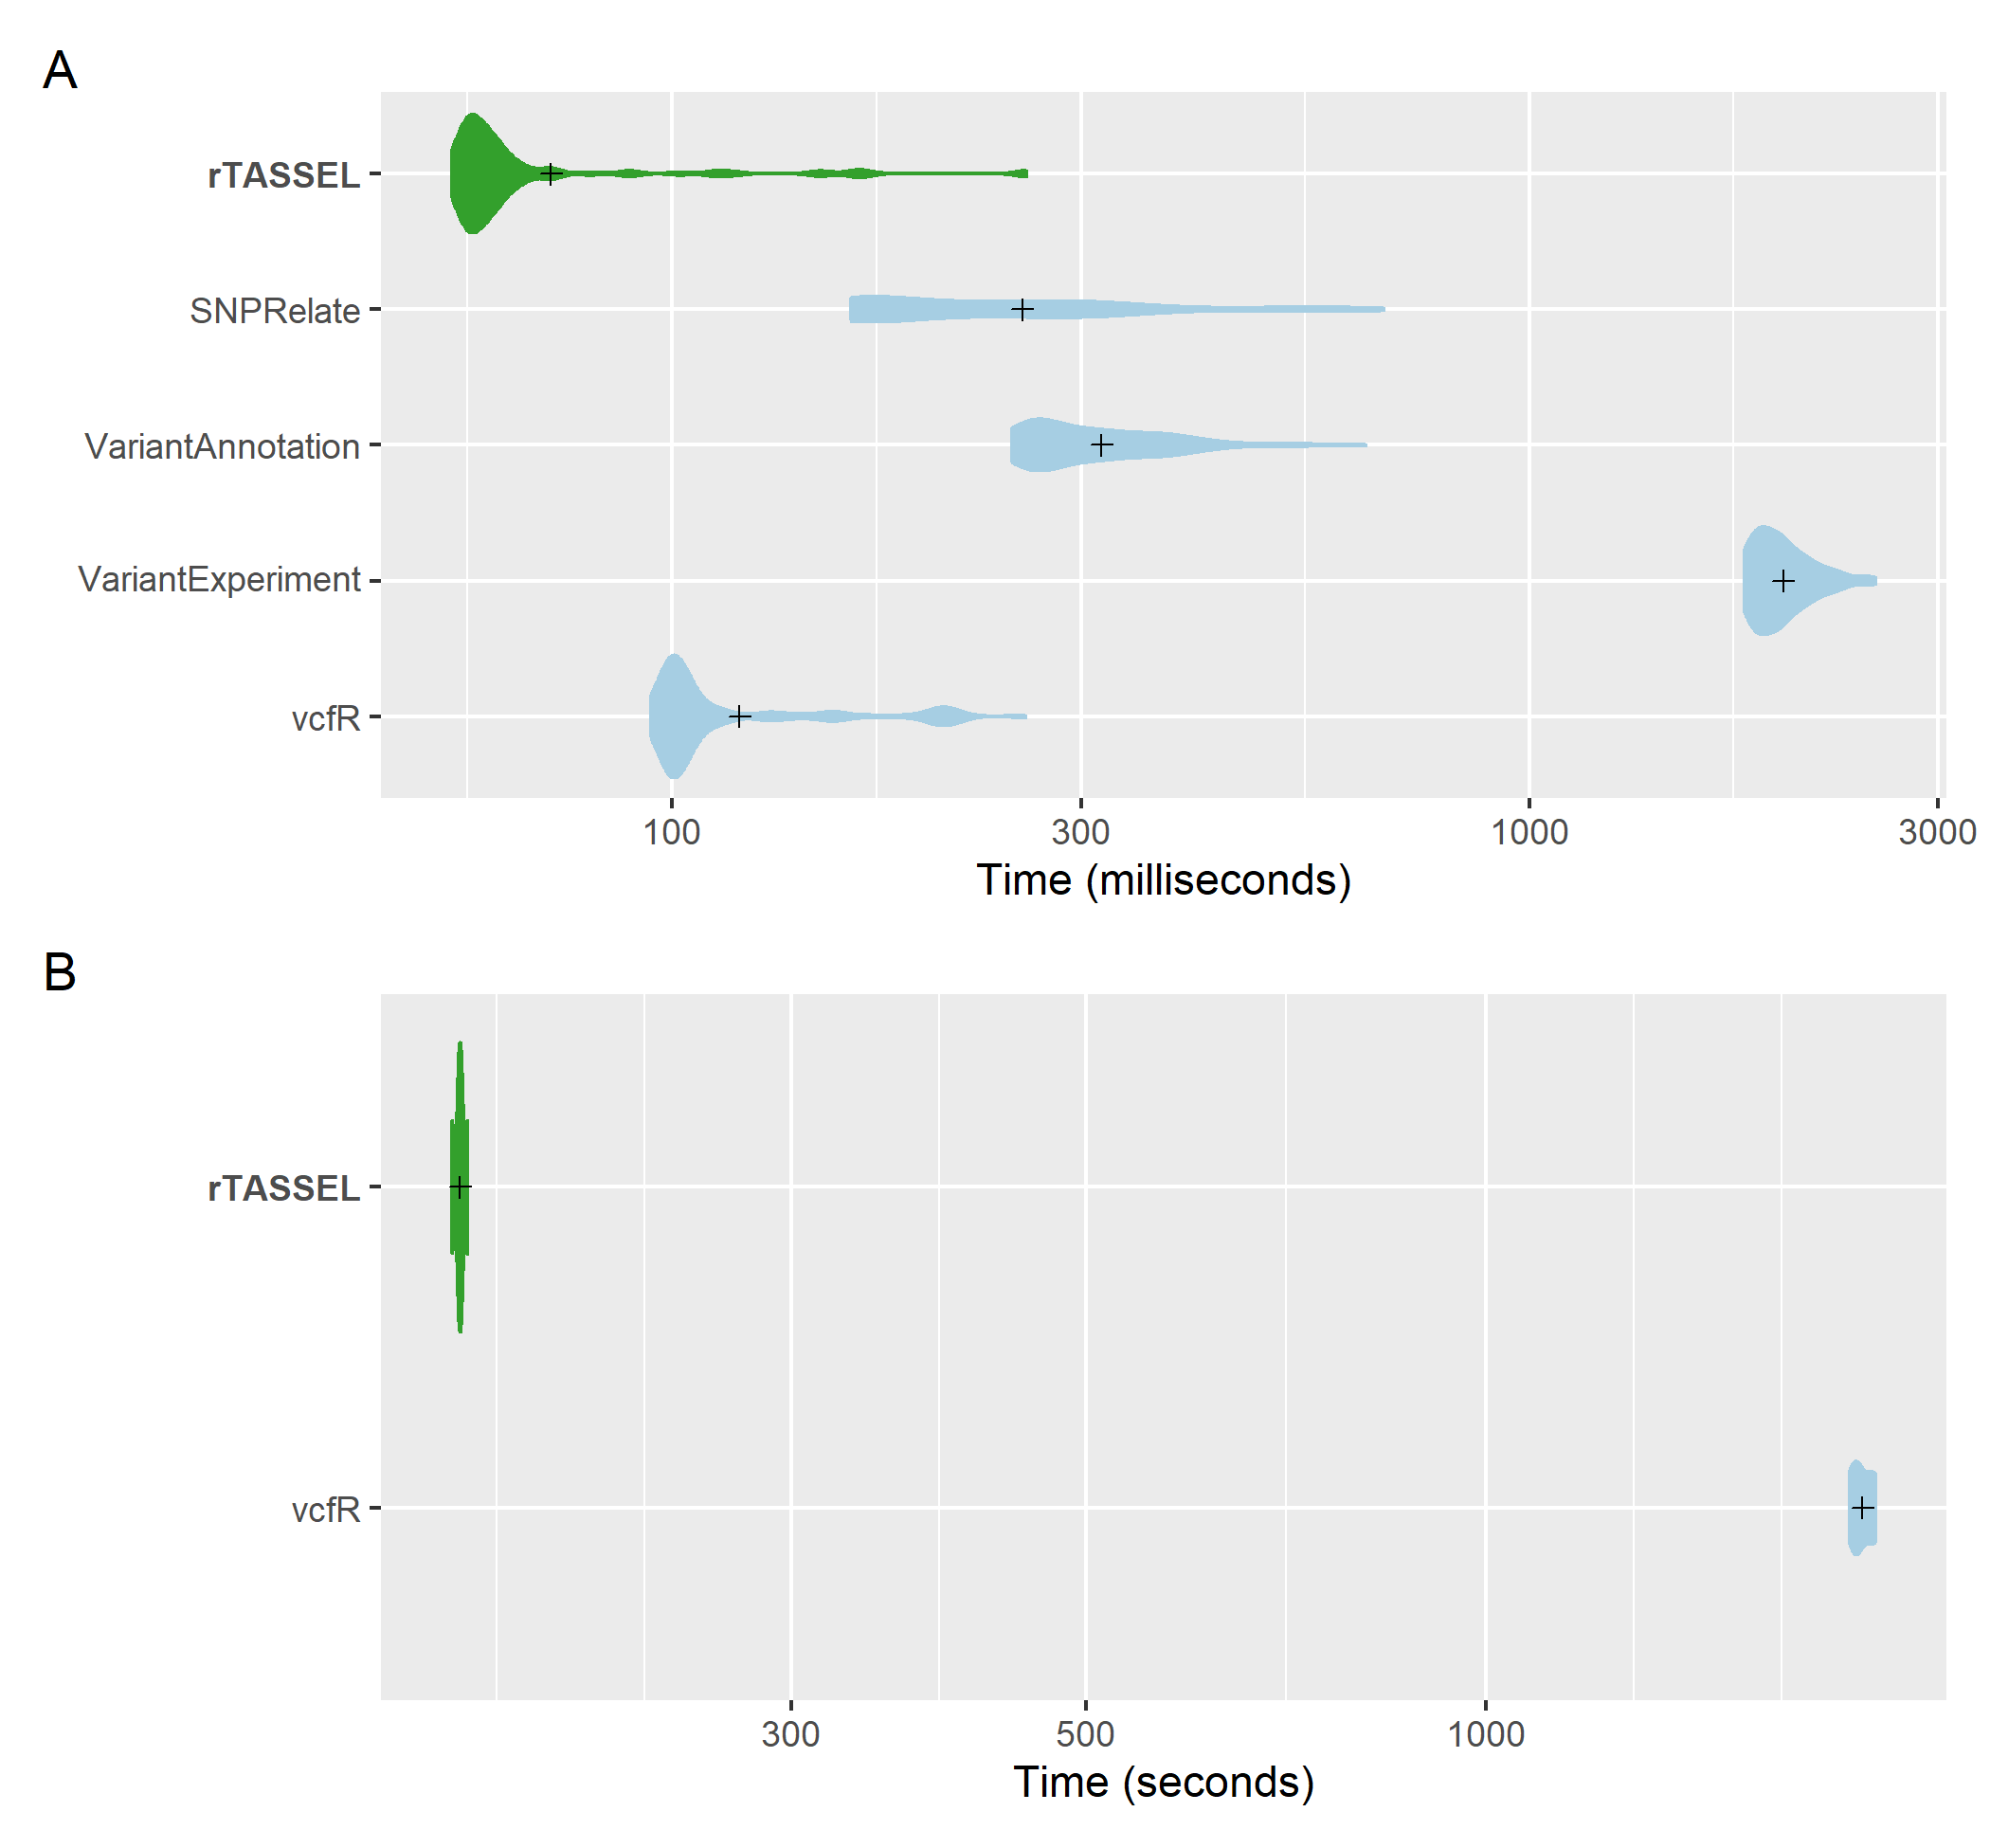 VCF import time comparisons of genotypic data. A distribution of replicated benchmark evaluations with recorded means (cross shapes) are plotted for rTASSEL and several R packages: SNPRelate (Zheng et al., 2012), VariantAnnotation (Obenchain et al., 2014), VariantExperiment (Liu et al., 2020), and vcfR (Knaus and Grünwald, 2017). Import times are recorded for 279 samples x 3093 variant sites (A) and 1,210 samples x 2,255,405 variant sites (B).